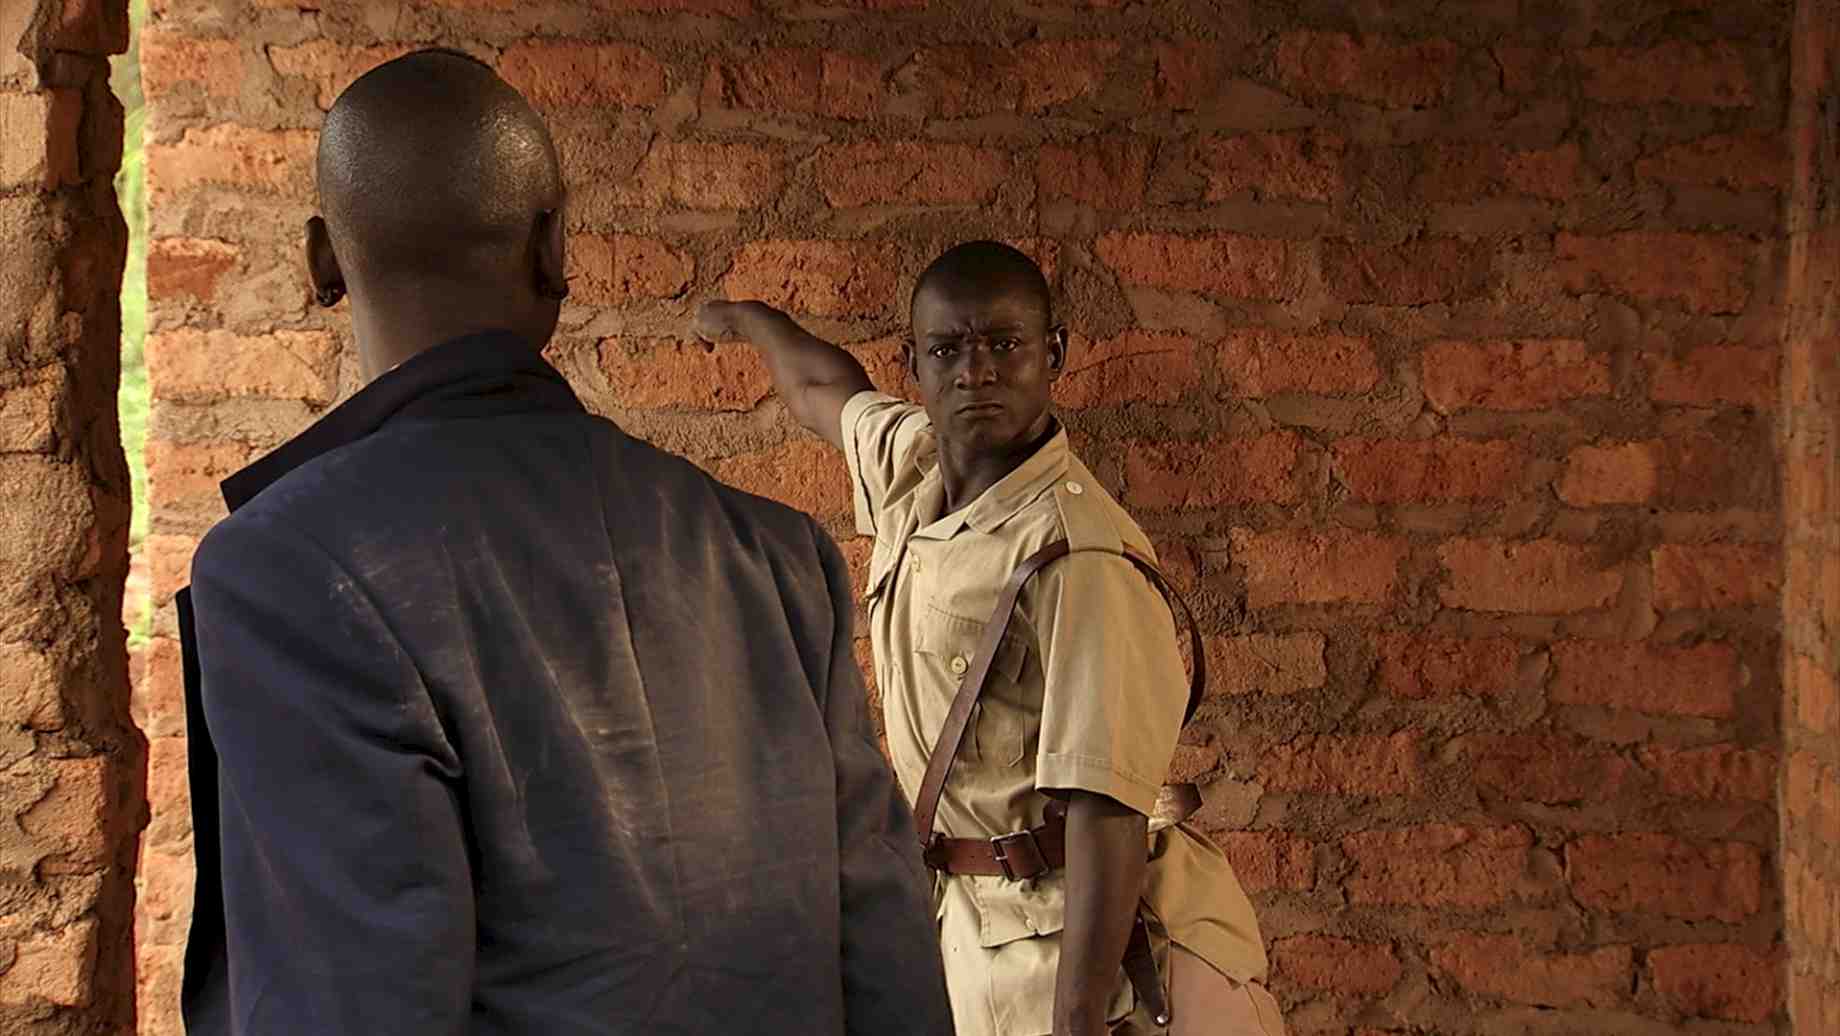 Souleymane Badolo, in NORA, as the policeman who attempts, but fails, to remove young Nora and her brother from their home.